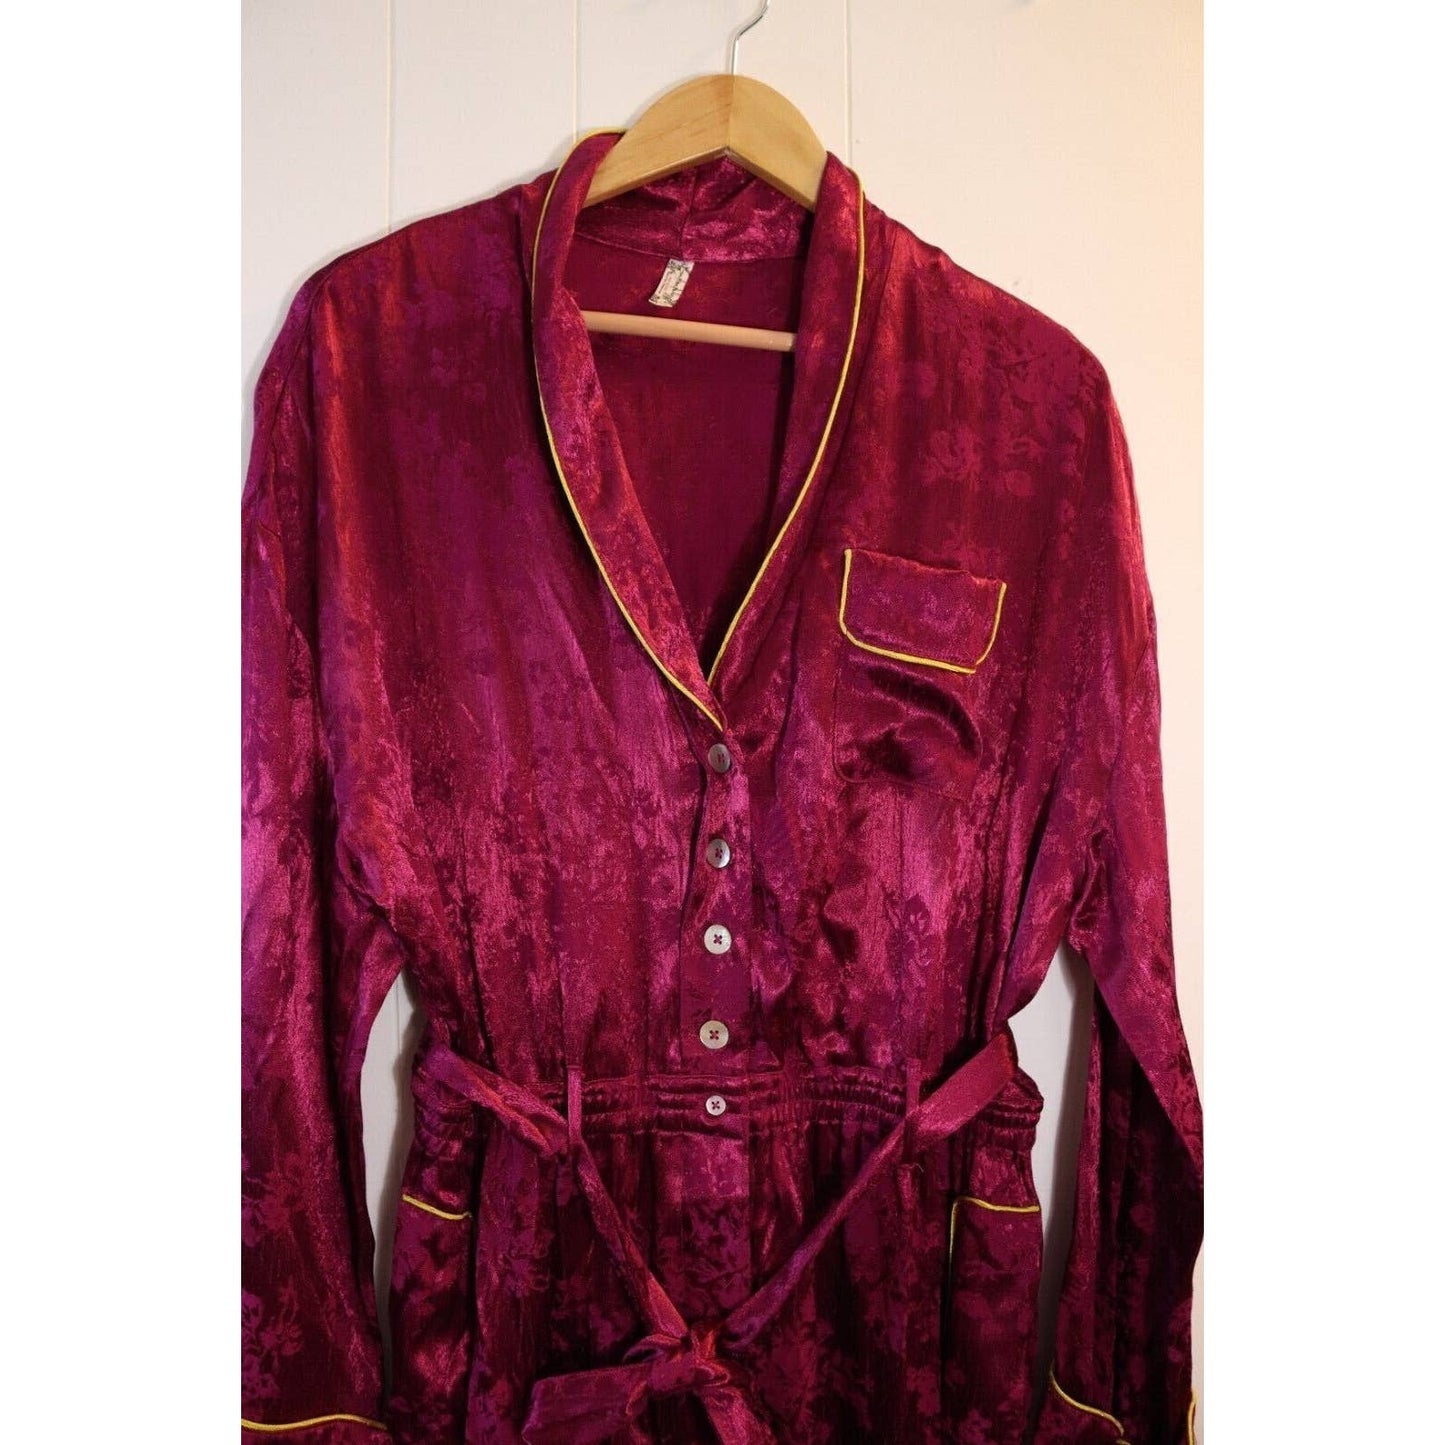 Intimately Free People Maroon Jumpsuit with Long Sleeves Size Medium